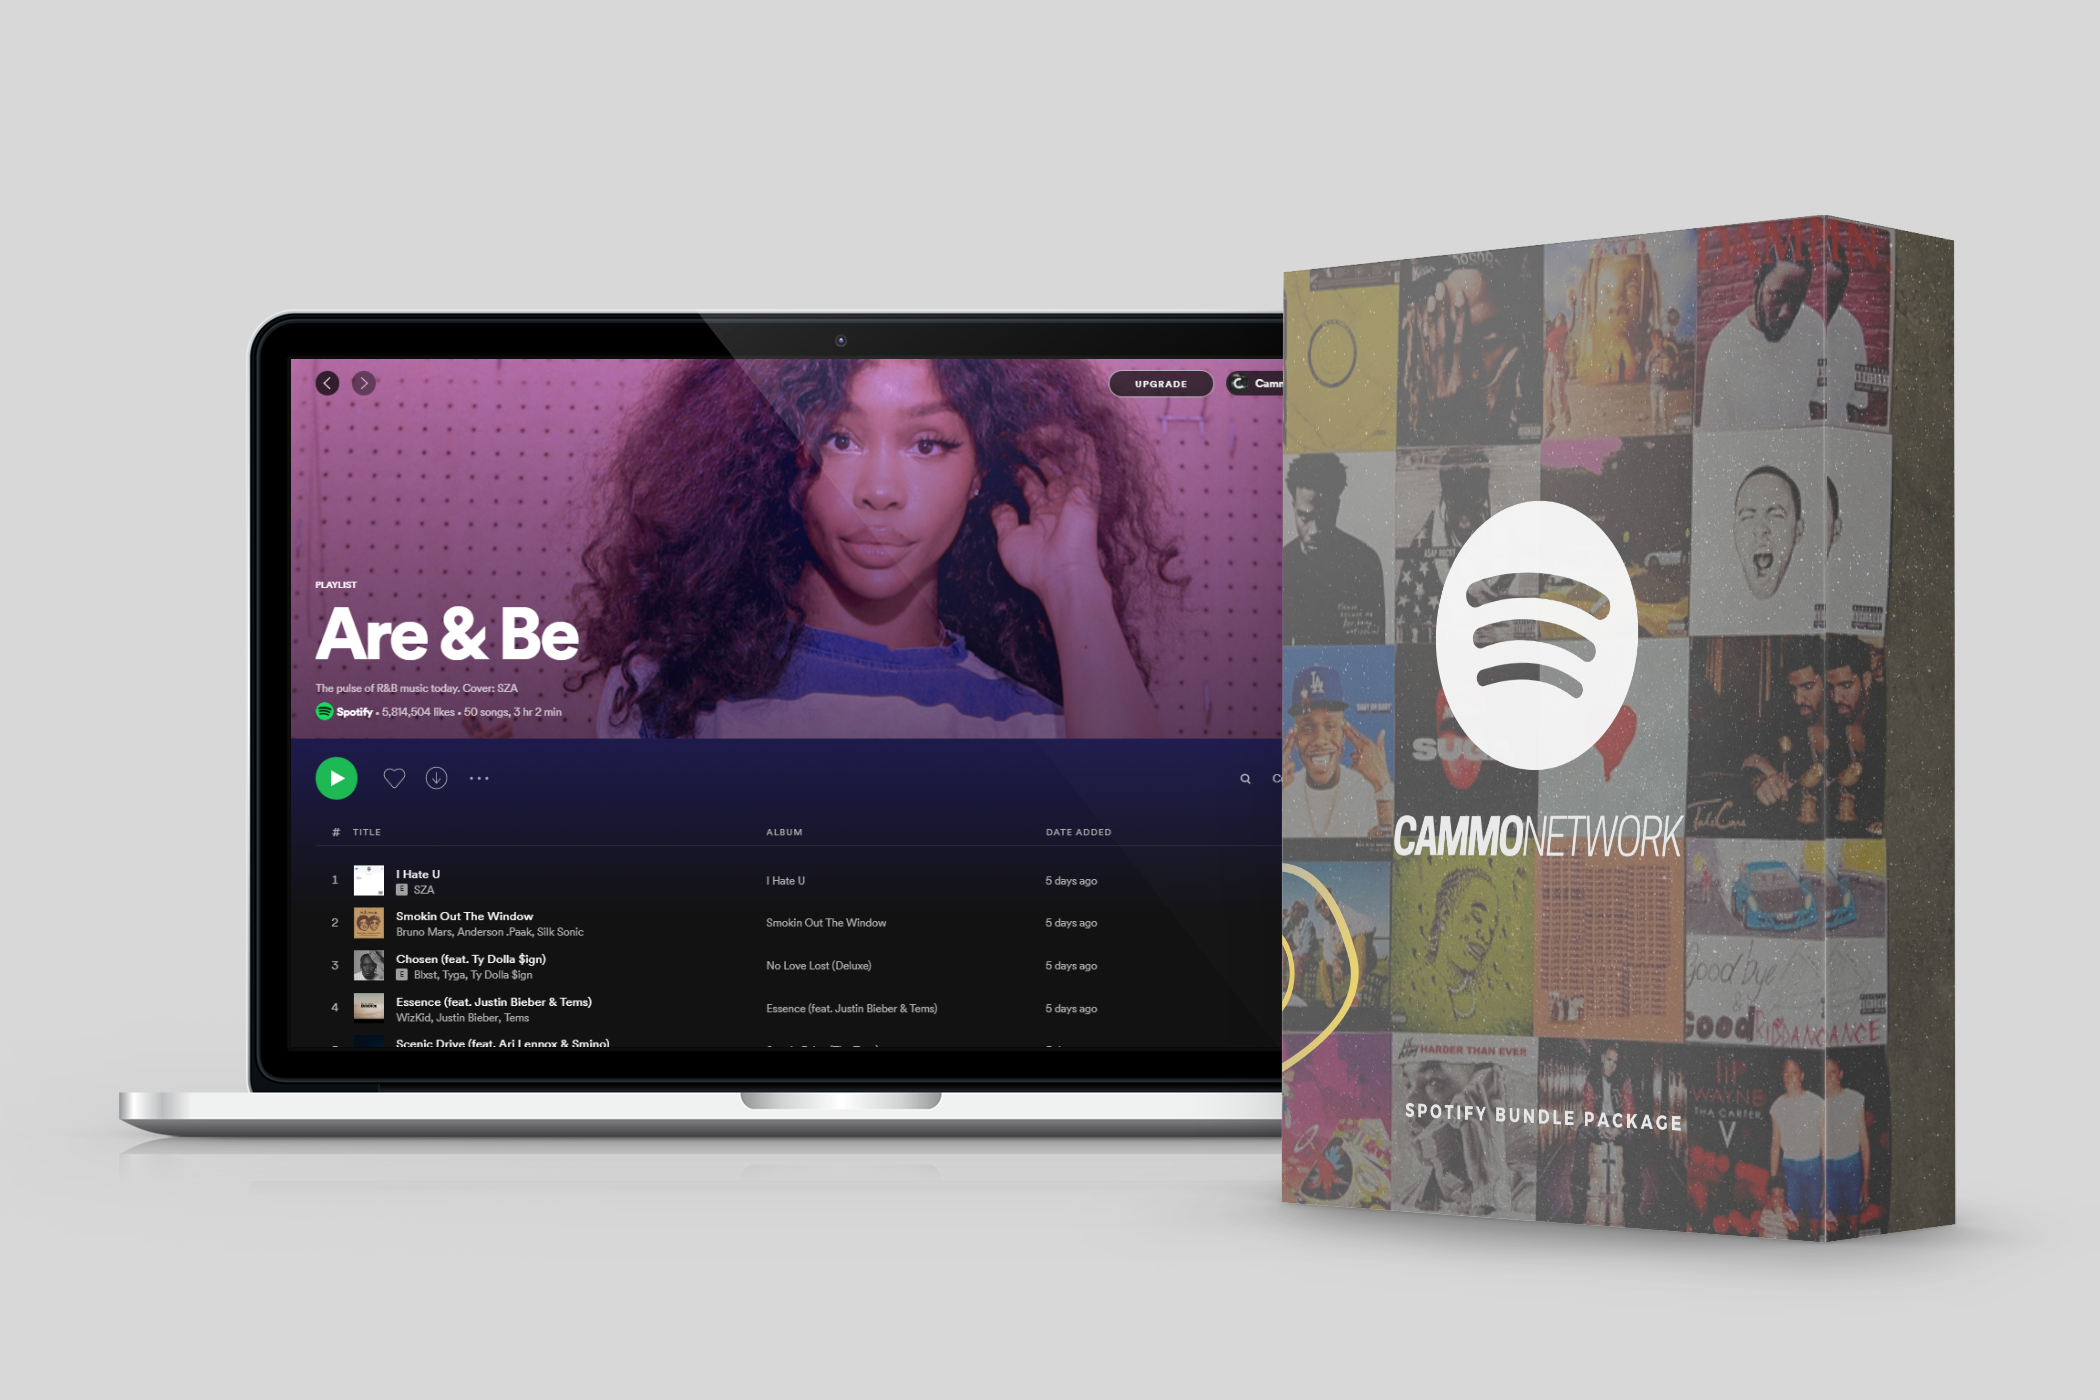 Successful Marketing on Spotify: A Deep Dive into Cammo Network’sSpotify Promotion